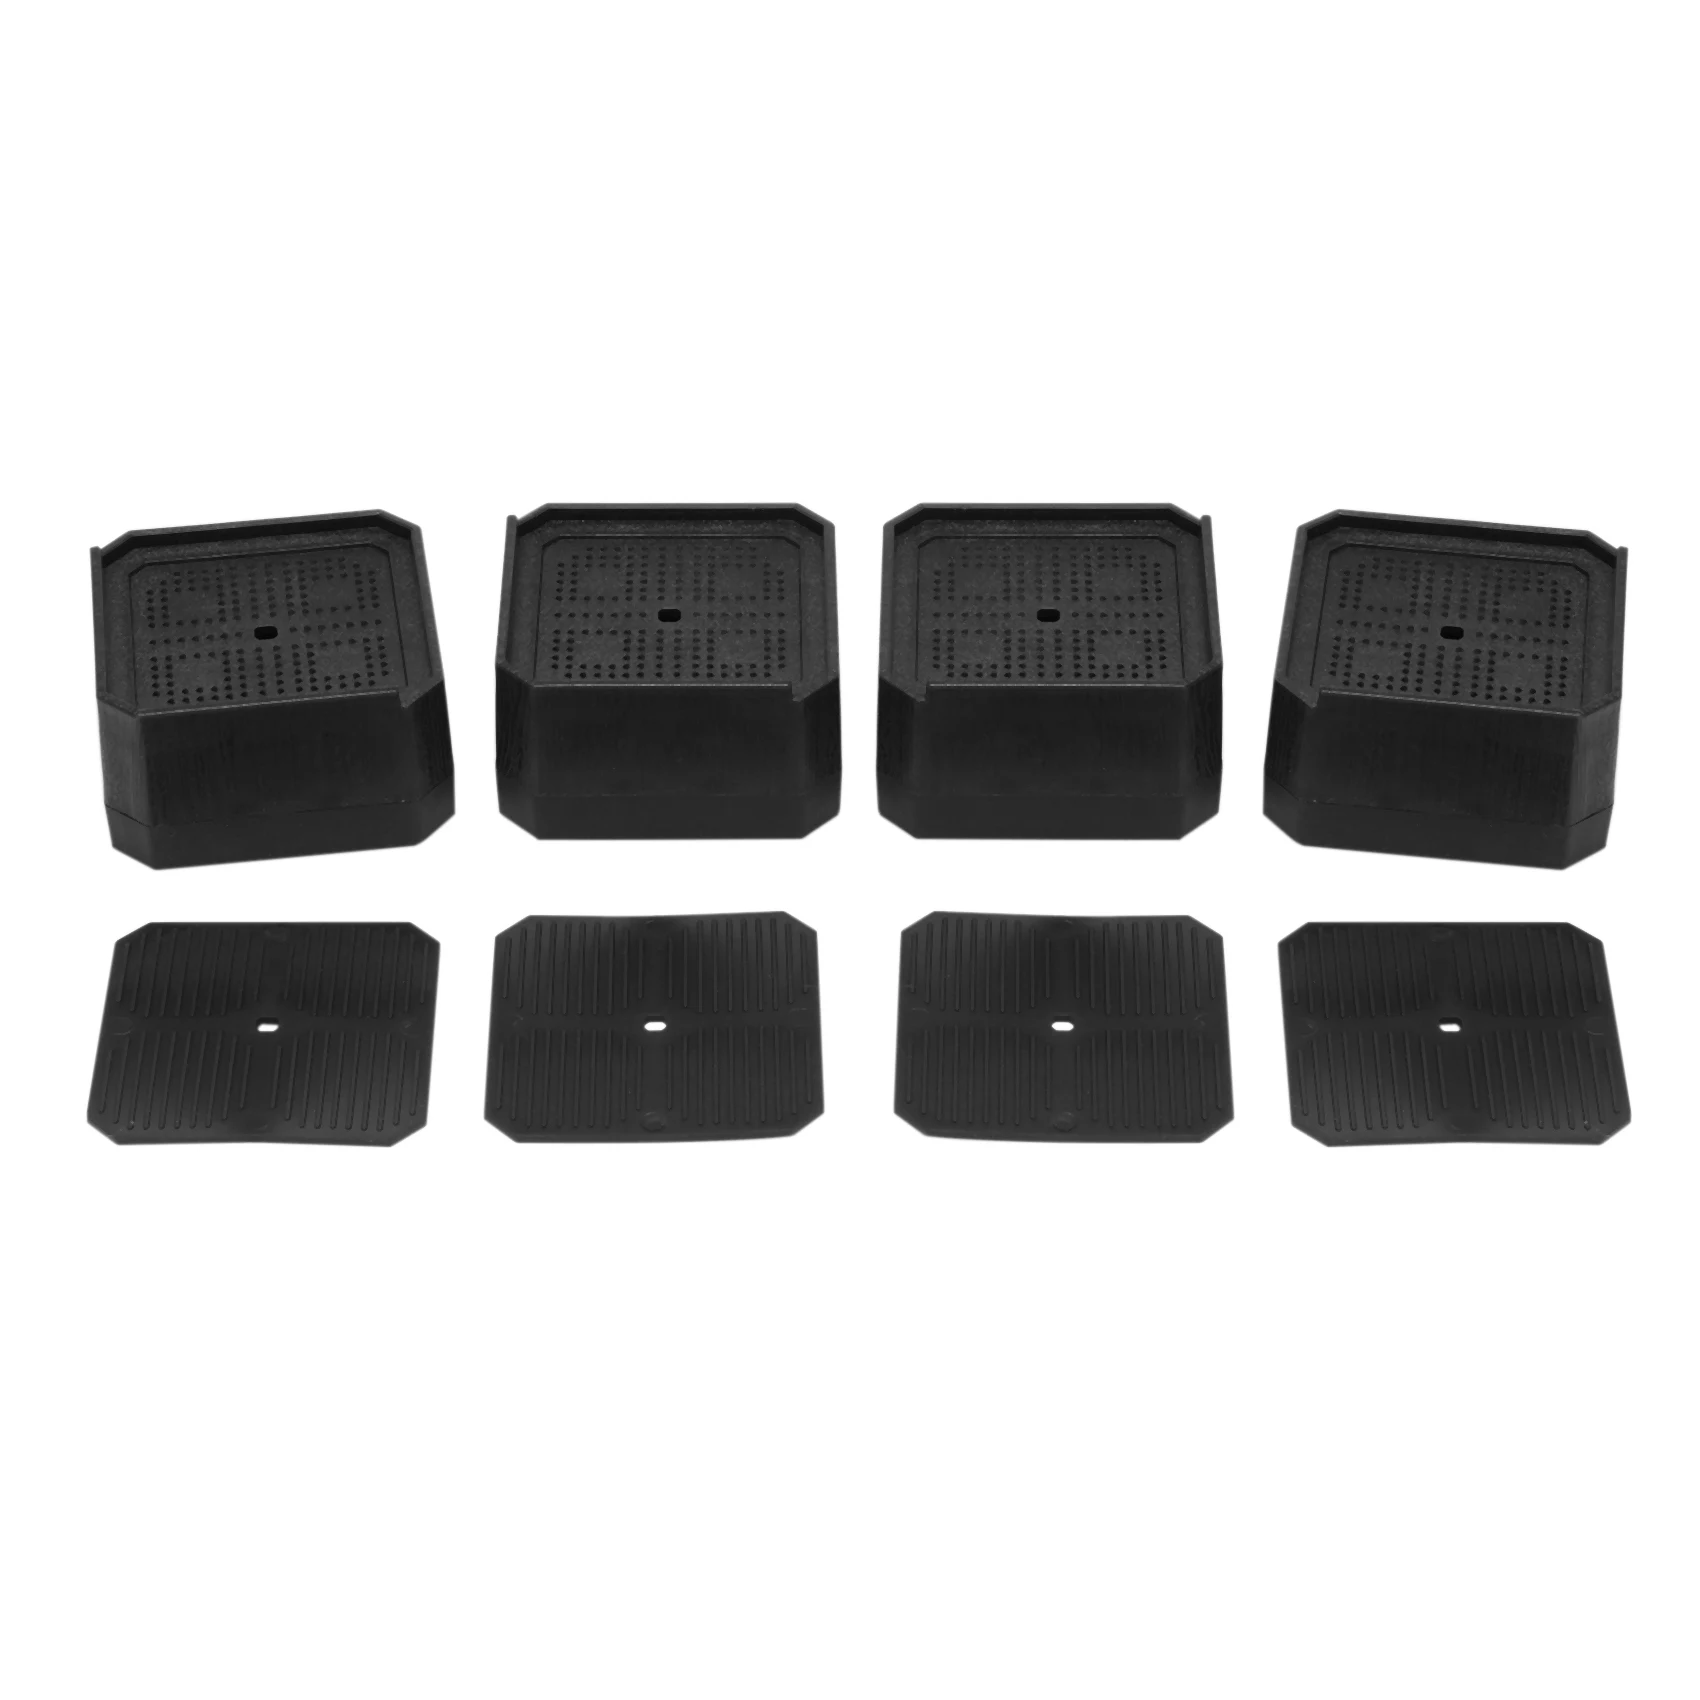 

Bed Risers Adjustable Furniture Risers 1.73 Inch Heights For Risers For Sofa, Table, And Chair And Dorm Bed Set Of 4Pcs